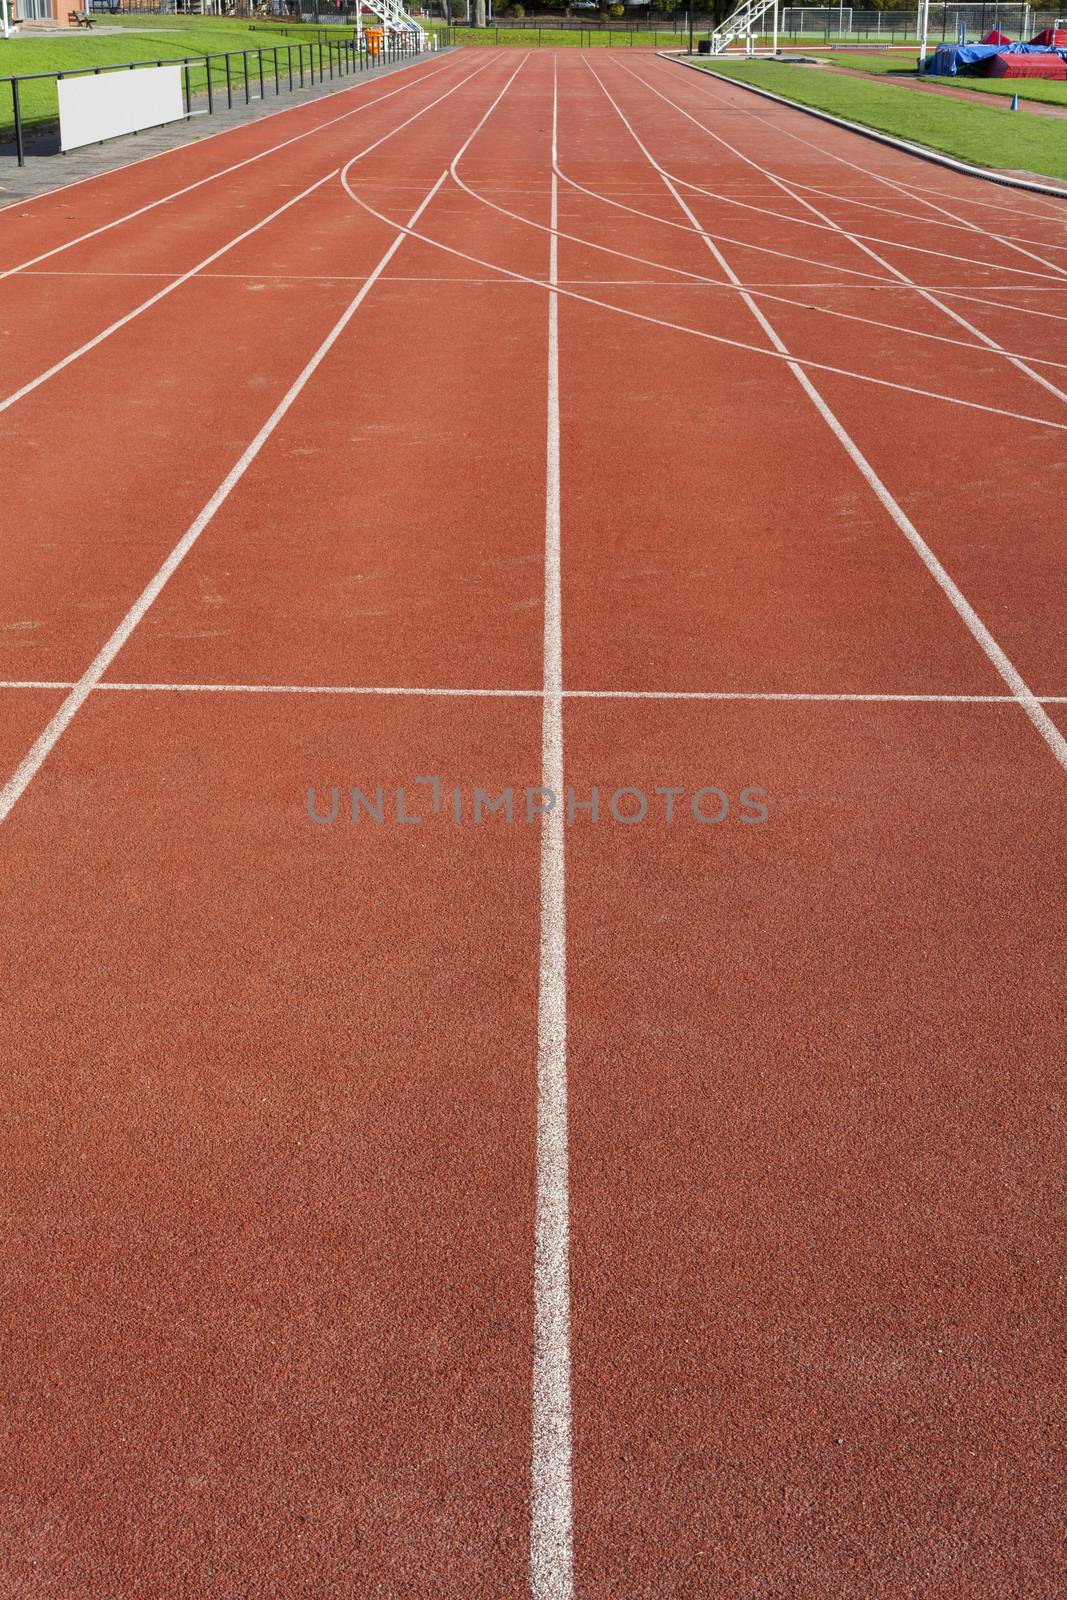 Running track for athletic trainig and competition by Tjeerdkruse